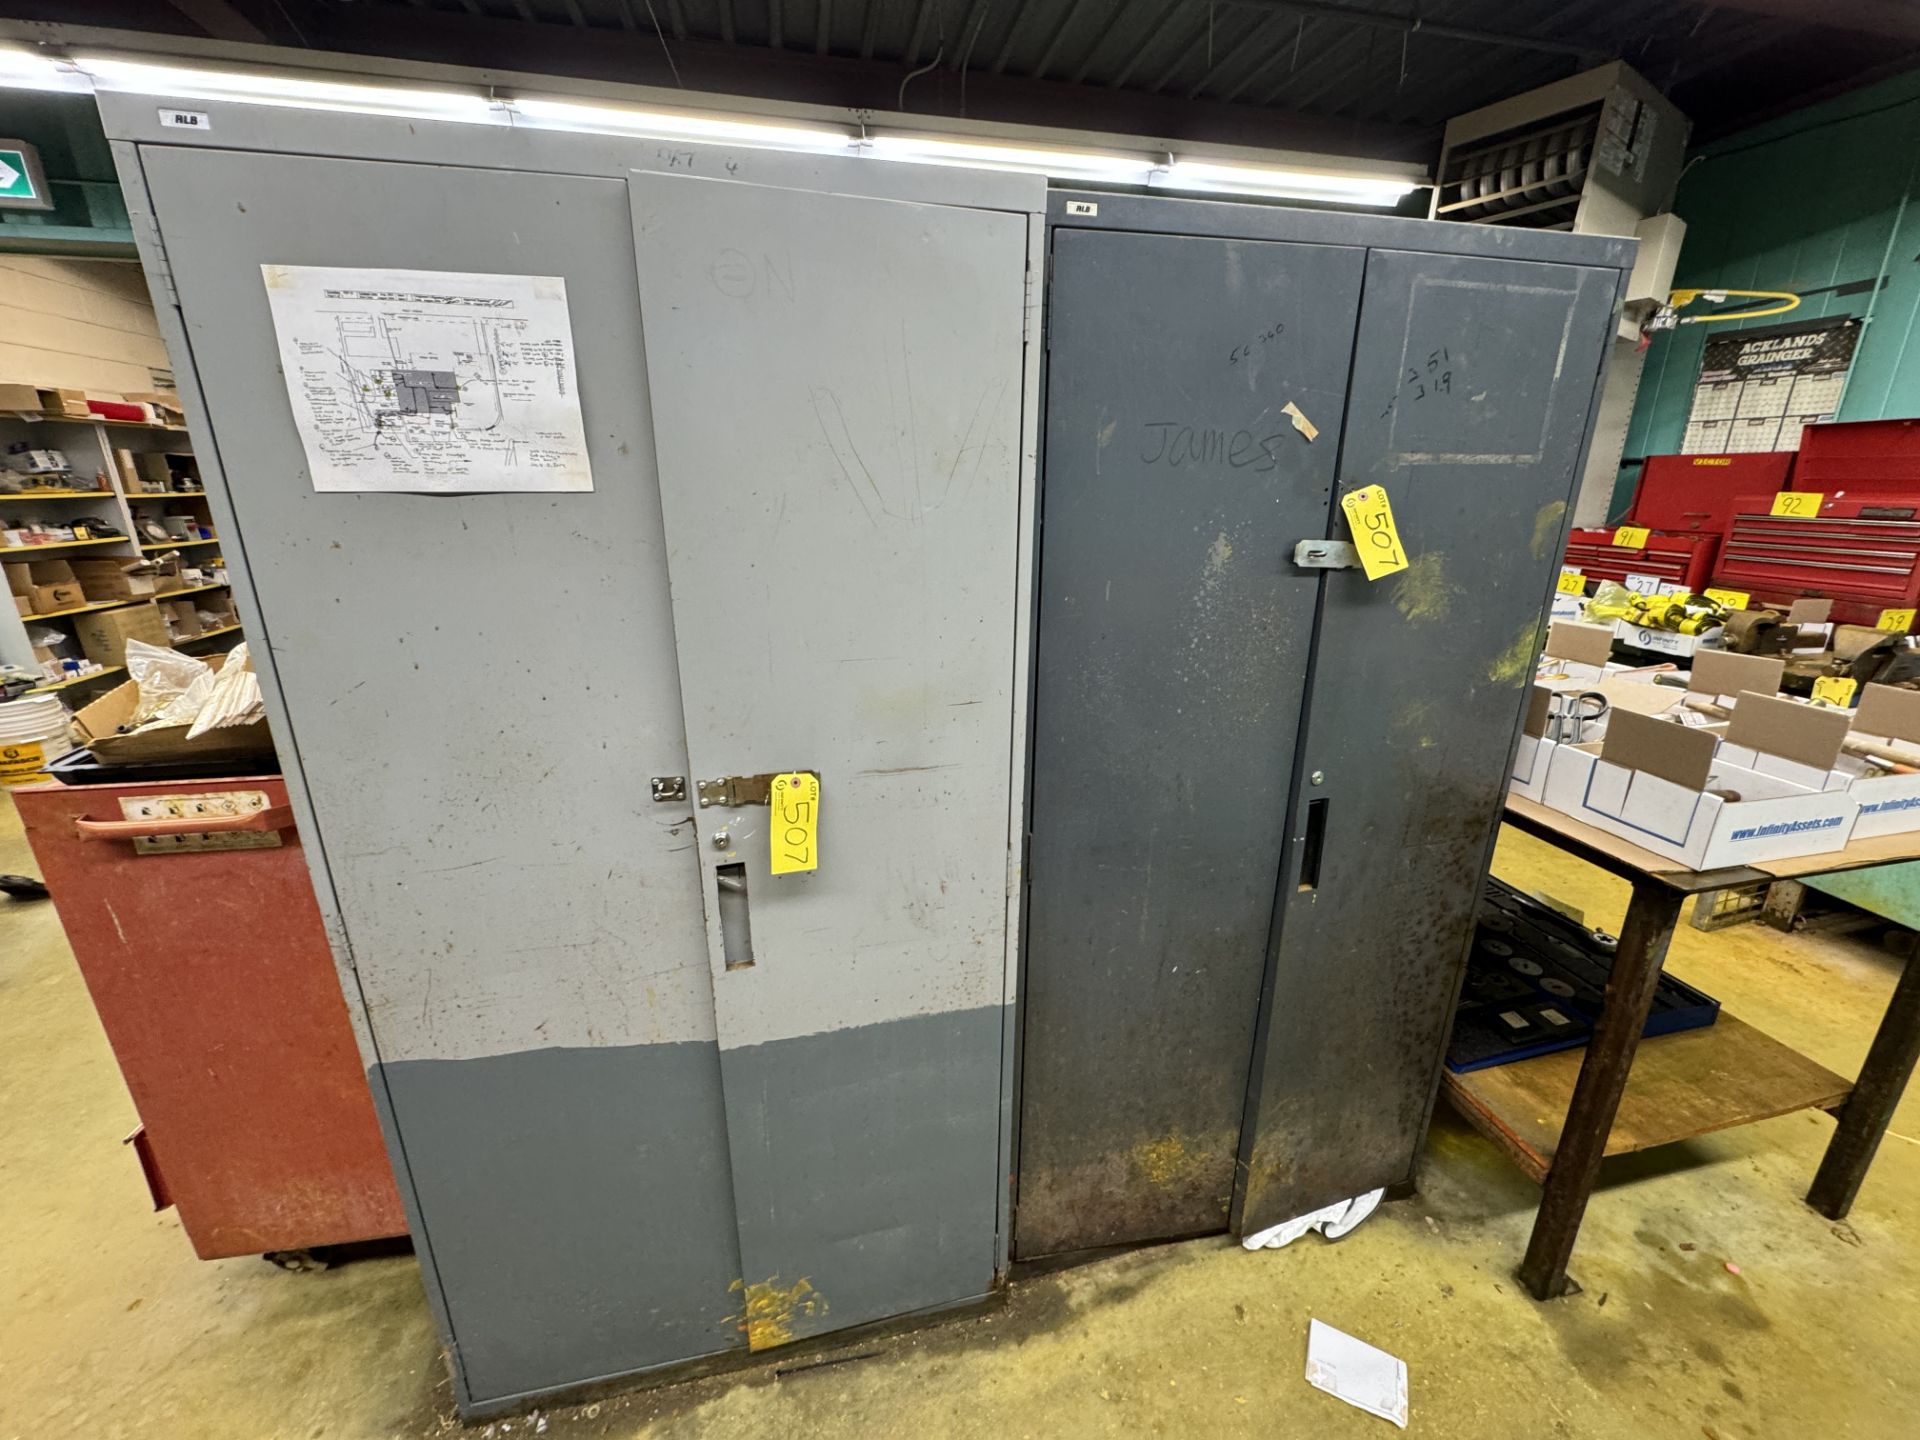 LOT OF (2) 2-DOOR METAL CABINETS W/ SAFETY SUPPLIES, MASKS, GLOVES, FILTERS - Image 3 of 4